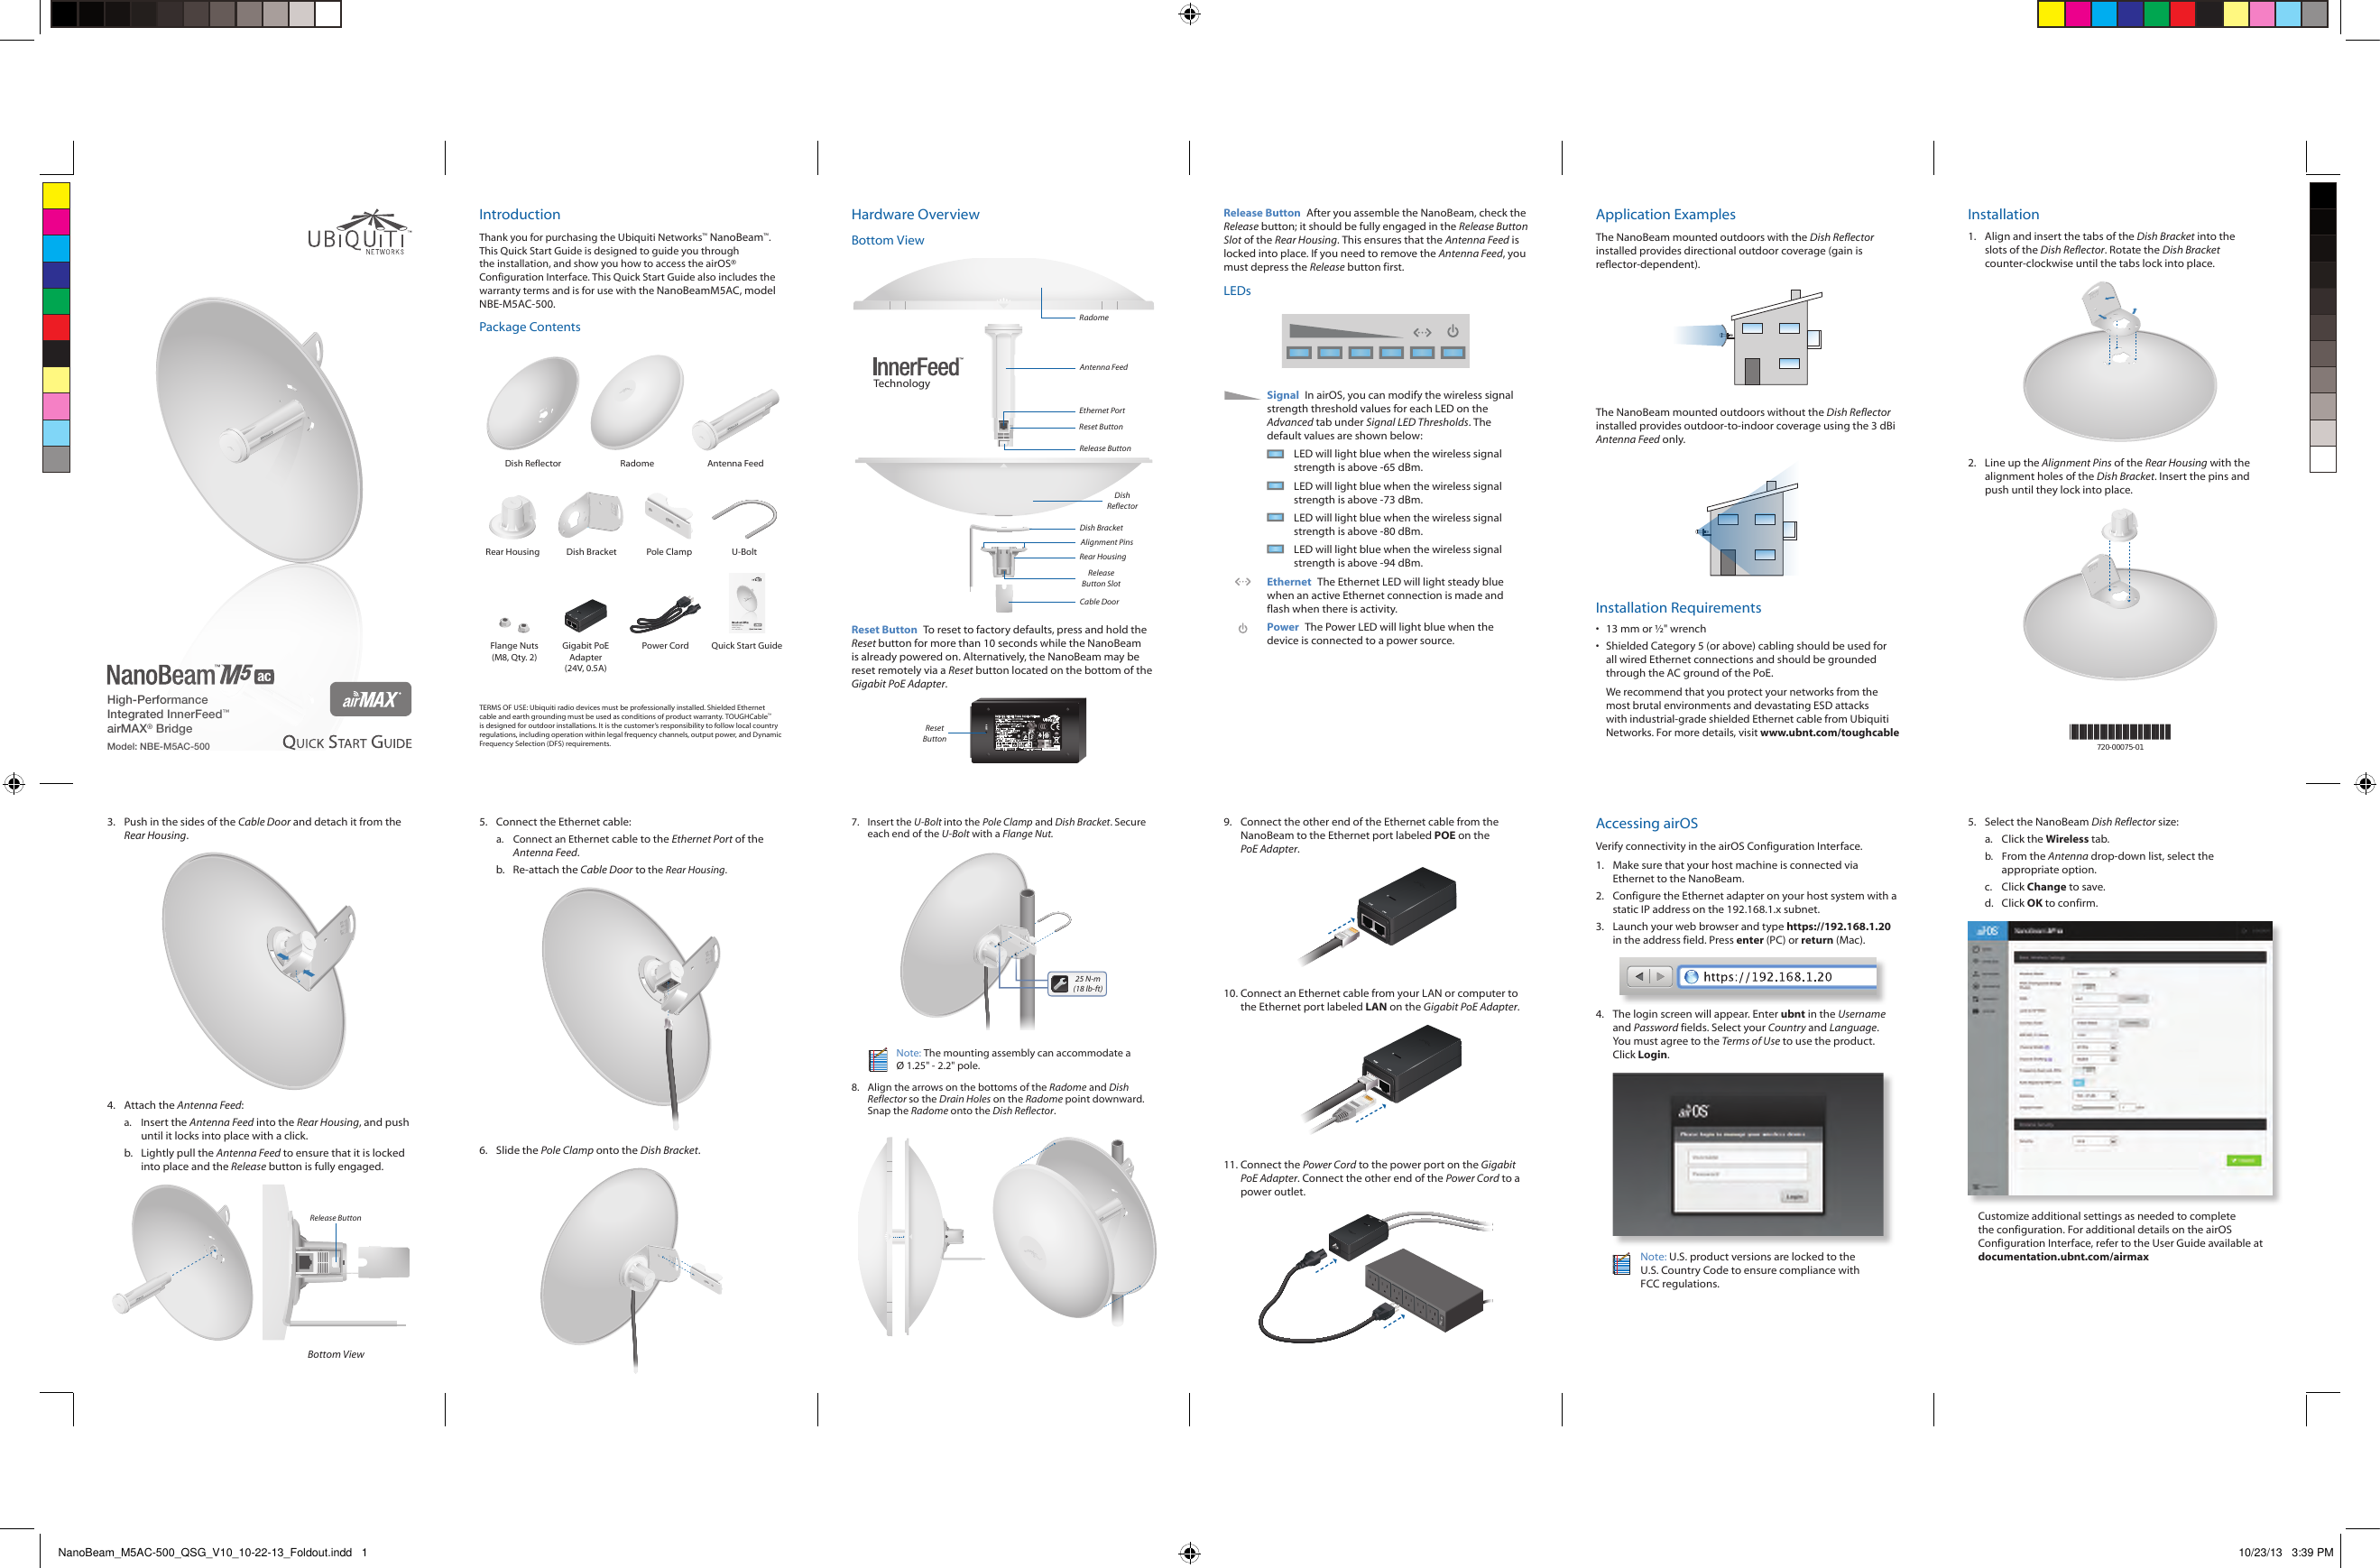 High-Performance Integrated InnerFeed™ airMAX® BridgeModel: NBE-M5AC-500IntroductionThank you for purchasing the Ubiquiti Networks™ NanoBeam™. This Quick Start Guide is designed to guide you through the installation, and show you how to access the airOS® Configuration Interface. This Quick Start Guide also includes the warranty terms and is for use with the NanoBeamM5AC, model NBE-M5AC-500.Package ContentsDish Reflector Radome Antenna Feed2010100Rear Housing Dish Bracket Pole Clamp U-BoltHigh-Performance Integrated InnerFeed™ airMAX® BridgeModel: NBE-M5AC-500Flange Nuts (M8, Qty. 2)Gigabit PoE Adapter (24V, 0.5A)Power Cord Quick Start GuideTERMS OF USE: Ubiquiti radio devices must be professionally installed. Shielded Ethernet cable and earth grounding must be used as conditions of product warranty. TOUGHCable™ is designed for outdoor installations. It is the customer’s responsibility to follow local country regulations, including operation within legal frequency channels, output power, and Dynamic Frequency Selection (DFS) requirements.Hardware OverviewBottom ViewCable DoorRear HousingTechnologyEthernet PortRelease Button SlotDish BracketRelease ButtonDish ReflectorAlignment PinsReset ButtonAntenna FeedRadomeReset Button  To reset to factory defaults, press and hold the Reset button for more than 10 seconds while the NanoBeam is already poweredon. Alternatively, the NanoBeam may be reset remotely via a Reset button located on the bottom of the Gigabit PoE Adapter.RESETMODELMODELO GP A240050G:.:INPUTENTRADA/100240V 50 60HzMAX 0 3A/ : .OUTPUTSAÍDA DC 24V 0 5A+ , ) ,-(,)(45pins78pinsITEPOWERSUPPLY. . .XXXXXXXXXXX-39PWE325809BRASILOCP0004ARGENTINAREPUELICARheinlandTUVSAFETYSEGURANCARRheinlandArgentinaS A. .ARGENTINAREPUBLICATUVA52VLPS...SwitchingGigabitPowerSupplyPOEPARAUTILIZAÇÃO COM EQUIPAMENTOISCO DE CHOQUE ELÉ CTRIC ODETECNOLOGIA DE INFORMAÇÃOAPENAS UTIL IZAÇÃO EM LOCAI S SECOSWARNINGISK OF ELECTRIC S HOCKDO NOTOPENMADE IN CHINAUbiquitiNetworksIncReset ButtonRelease Button  After you assemble the NanoBeam, check the Release button; it should be fully engaged in the Release Button Slot of the Rear Housing. This ensures that the Antenna Feed is locked into place. If you need to remove the Antenna Feed, you must depress the Release button first.LEDsSignal  In airOS, you can modify the wireless signal strength threshold values for each LED on the Advanced tab under Signal LED Thresholds. The default values are shown below:LED will light blue when the wireless signal strength is above -65 dBm.LED will light blue when the wireless signal strength is above -73 dBm.LED will light blue when the wireless signal strength is above -80 dBm.LED will light blue when the wireless signal strength is above -94 dBm.Ethernet  The Ethernet LED will light steady blue when an active Ethernet connection is made and flash when there is activity.Power The Power LED will light blue when the device is connected to a power source.Application ExamplesThe NanoBeam mounted outdoors with the Dish Reflector installed provides directional outdoor coverage (gain is reflector‑dependent).The NanoBeam mounted outdoors without the Dish Reflector installed provides outdoor‑to‑indoor coverage using the 3 dBi Antenna Feed only.Installation Requirements•  13 mm or ½&quot; wrench•  Shielded Category 5 (or above) cabling should be used for all wired Ethernet connections and should be grounded through the AC ground of the PoE.We recommend that you protect your networks from the most brutal environments and devastating ESD attacks with industrial‑grade shielded Ethernet cable from Ubiquiti Networks. For more details, visit www.ubnt.com/toughcableInstallation1.  Align and insert the tabs of the Dish Bracket into the slots of the Dish Reflector. Rotate the Dish Bracket counter‑clockwise until the tabs lock into place.20101002.  Line up the Alignment Pins of the Rear Housing with the alignment holes of the Dish Bracket. Insert the pins and push until they lock intoplace.2010100*720-00075-01*720-00075-013.  Push in the sides of the Cable Door and detach it from the Rear Housing.20100104.  Attach the Antenna Feed:a.  Insert the Antenna Feed into the Rear Housing, and push until it locks into place with a click. b.  Lightly pull the Antenna Feed to ensure that it is locked into place and the Release button is fully engaged.Release ButtonBottom View5.  Connect the Ethernet cable:a.  Connect an Ethernet cable to the Ethernet Port of the Antenna Feed. b.  Re-attach the Cable Door to the Rear Housing.20100106.  Slide the Pole Clamp onto the Dish Bracket.20101007.  Insert the U-Bolt into the Pole Clamp and Dish Bracket. Secure each end of the U-Bolt with a Flange Nut.201010025 N-m (18 lb-ft)Note: The mounting assembly can accommodate a  Ø 1.25&quot; - 2.2&quot; pole.8.  Align the arrows on the bottoms of the Radome and Dish Reflector so the Drain Holes on the Radome point downward. Snap the Radome onto the Dish Reflector.9.  Connect the other end of the Ethernet cable from the NanoBeam to the Ethernet port labeled POE on the PoEAdapter.10. Connect an Ethernet cable from your LAN or computer to the Ethernet port labeled LAN on the Gigabit PoE Adapter.11. Connect the Power Cord to the power port on the Gigabit PoE Adapter. Connect the other end of the Power Cord to a power outlet.Accessing airOSVerify connectivity in the airOS Configuration Interface. 1.  Make sure that your host machine is connected via Ethernet to the NanoBeam. 2.  Configure the Ethernet adapter on your host system with a static IP address on the 192.168.1.x subnet.3.  Launch your web browser and type https://192.168.1.20 in the address field. Press enter (PC) or return (Mac). 4.  The login screen will appear. Enter ubnt in the Username and Password fields. Select your Country and Language. You must agree to the Terms of Use to use the product. Click Login.Note: U.S. product versions are locked to the U.S. Country Code to ensure compliance with FCCregulations. 5.  Select the NanoBeam Dish Reflector size:a.  Click the Wireless tab.b.  From the Antenna drop-down list, select the appropriate option.c.  Click Change to save.d.  Click OK to confirm.Customize additional settings as needed to complete the configuration. For additional details on the airOS Configuration Interface, refer to the User Guide available at documentation.ubnt.com/airmaxNanoBeam_M5AC-500_QSG_V10_10-22-13_Foldout.indd   1 10/23/13   3:39 PM